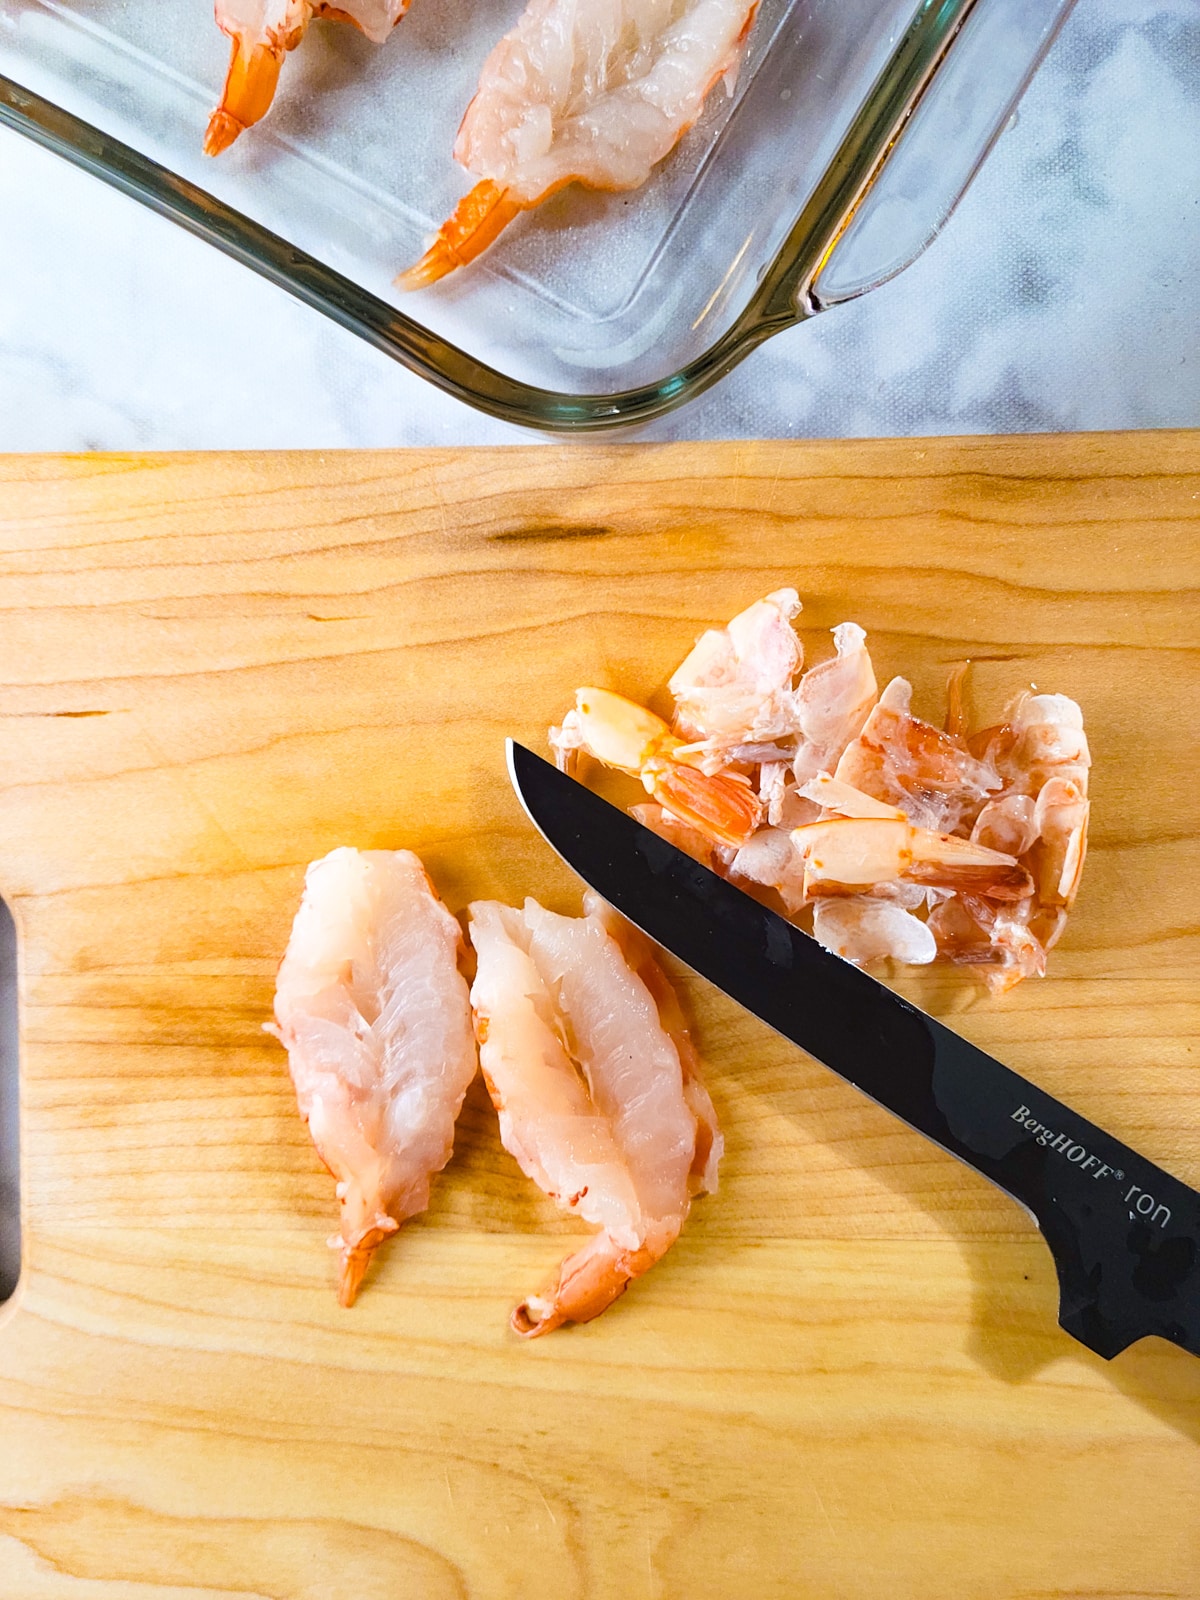 Shrimps being butterflied on a wooden cutting board.